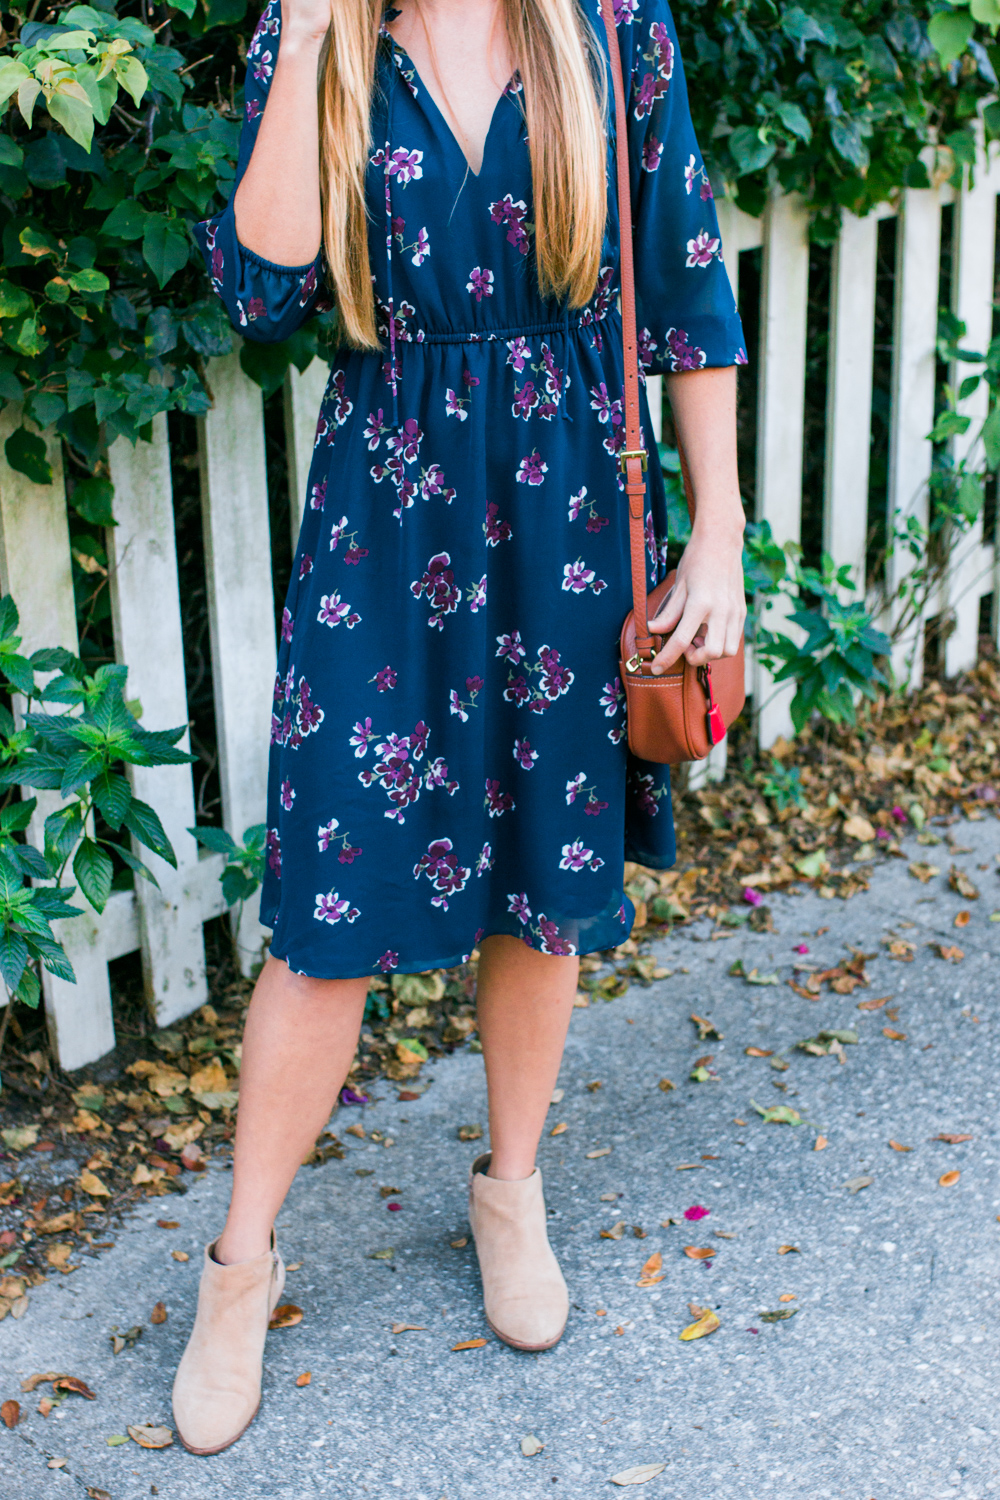 What to Wear in Florida During the Winter / Blue Floral Midi Dress / Long Sleeve Midi Dress with Ankle Boots / J.Crew Leather Bag / Panama Hat / Midi Dress for Work / More on www.thesunshinestyle.com #mididress #dresses #floral #blogger #fashionblogger #styletip